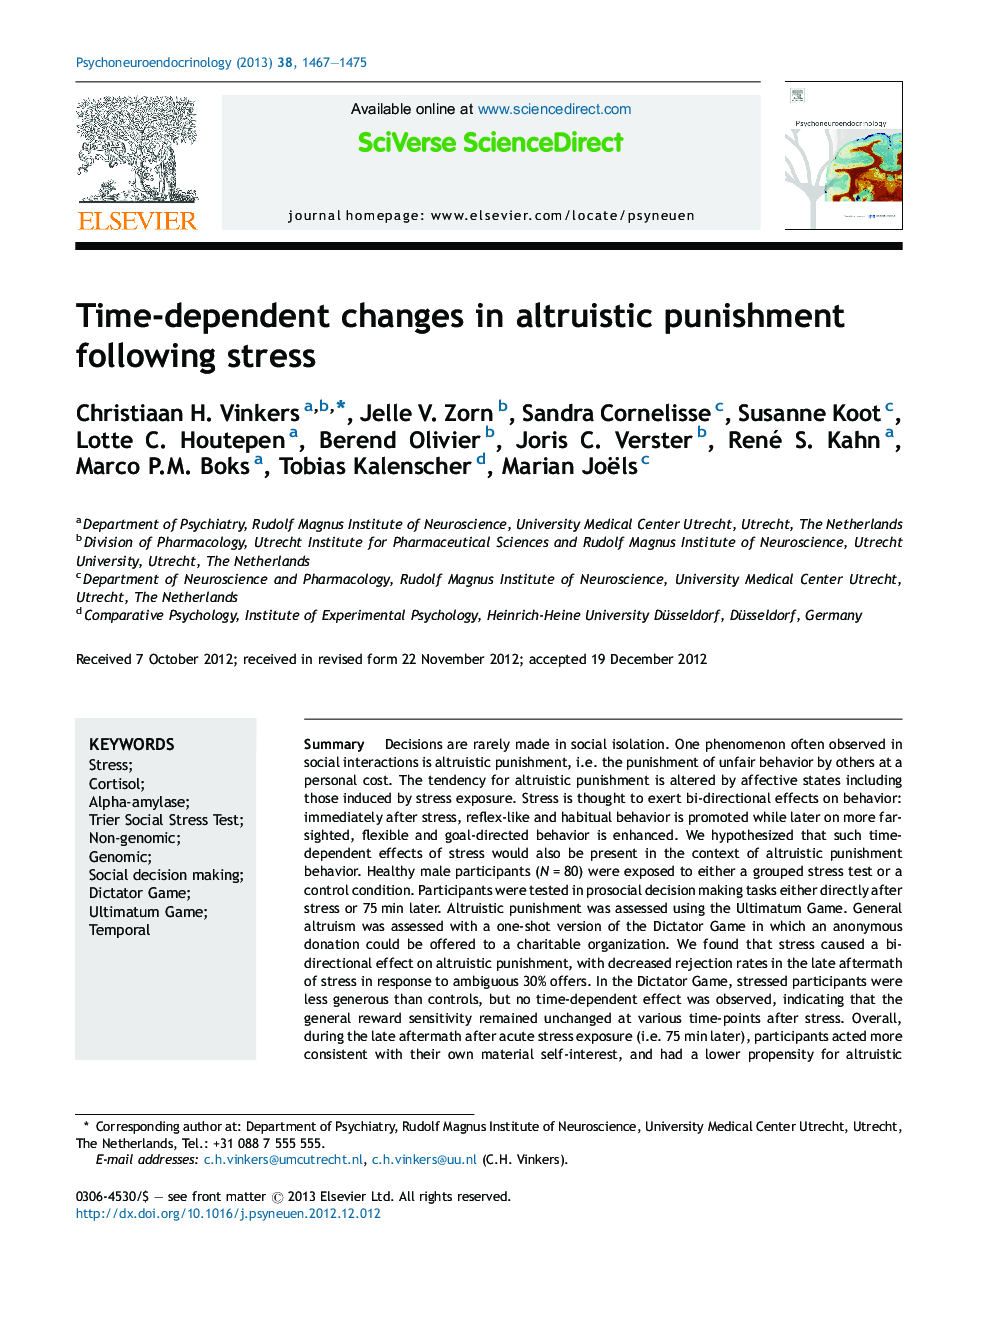 Time-dependent changes in altruistic punishment following stress